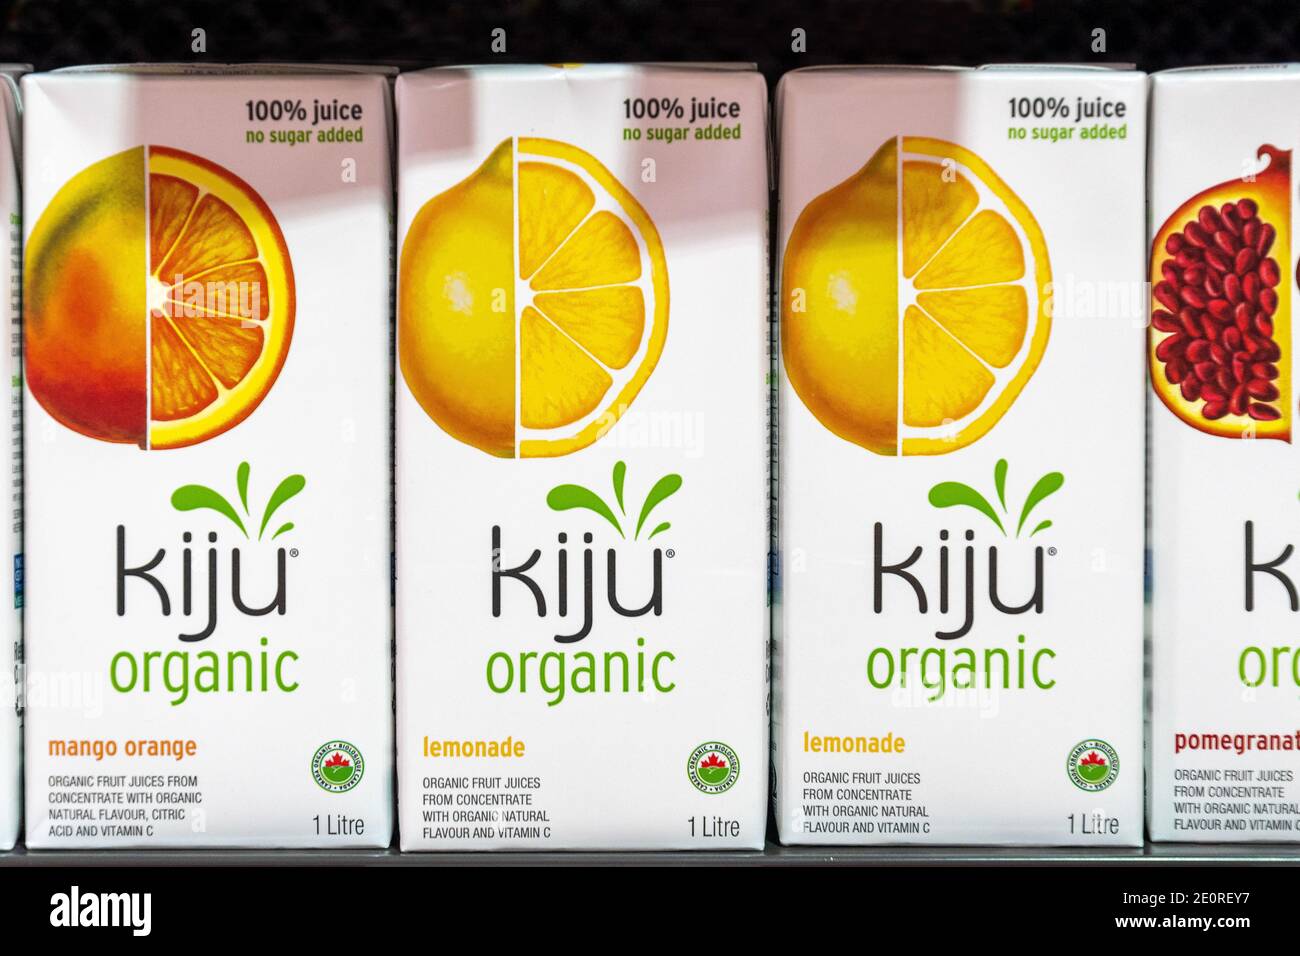 Boxes of Kiju branded organic juice. There are flavors of Mango, Lemonade, and Pomegranate.  The boxes are seen on a store shelf. There are no people i Stock Photo